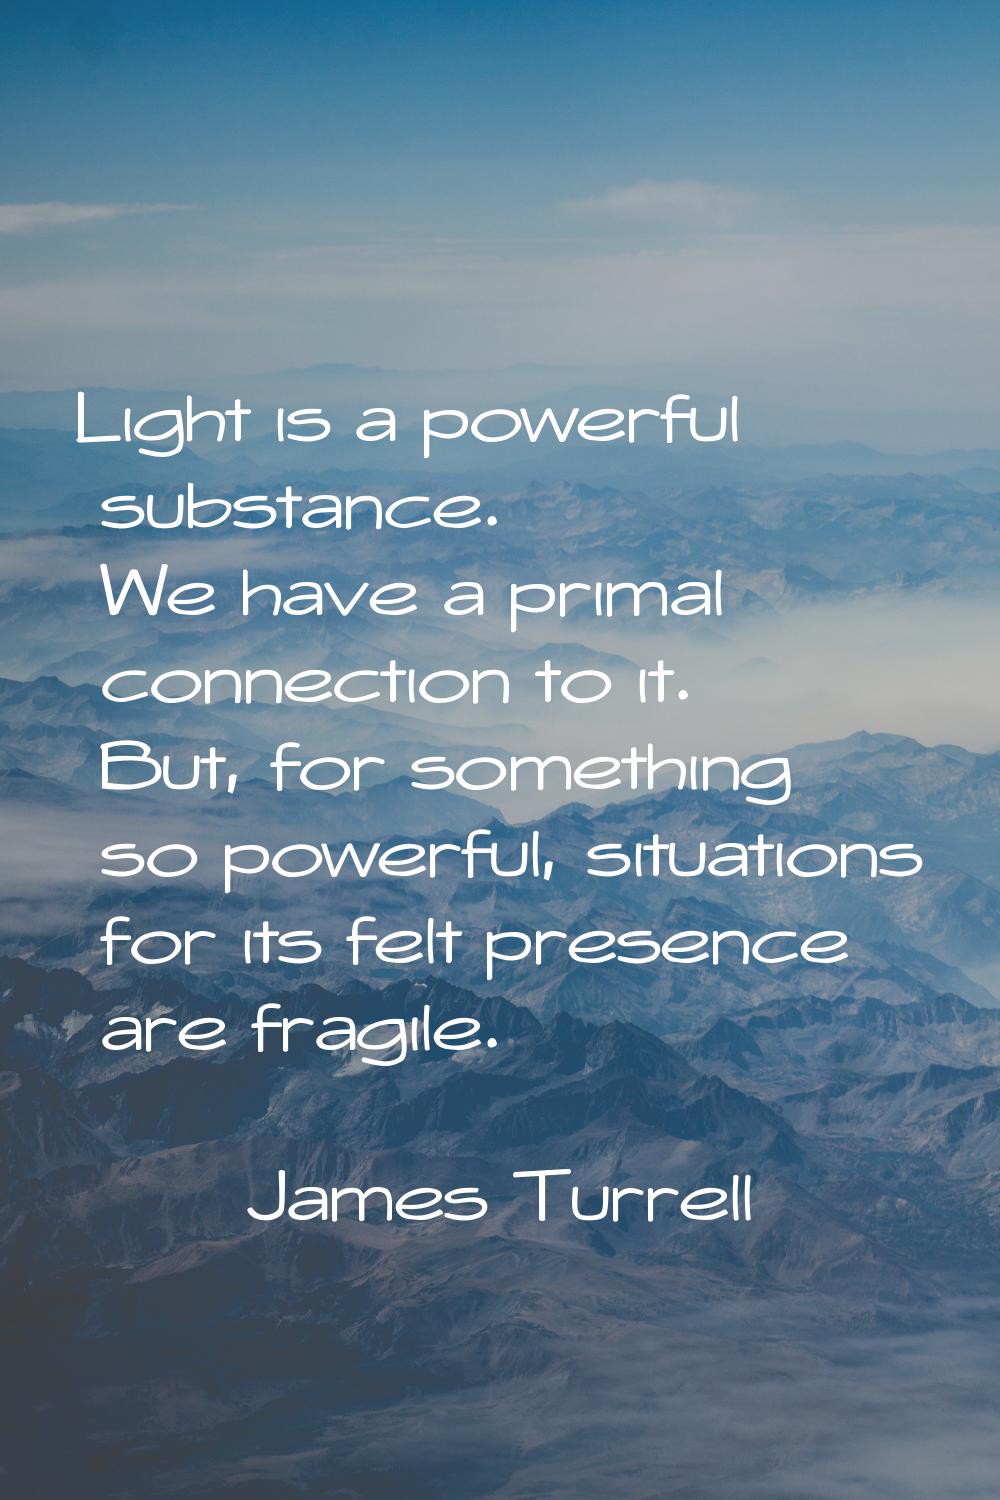 Light is a powerful substance. We have a primal connection to it. But, for something so powerful, s